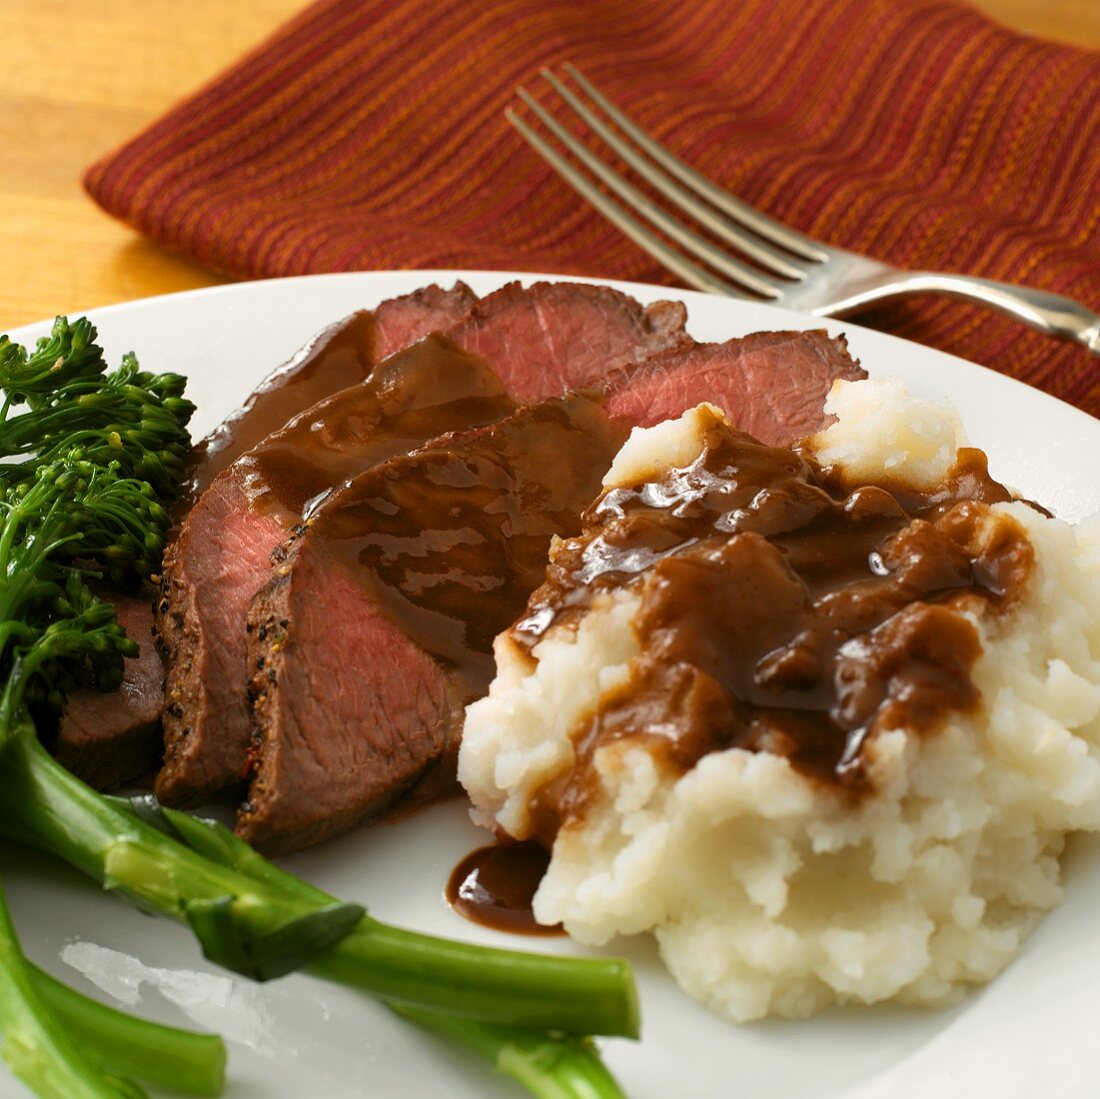 Sliced Roast Beef with Mashed Potatoes and Gravy; Broccolini